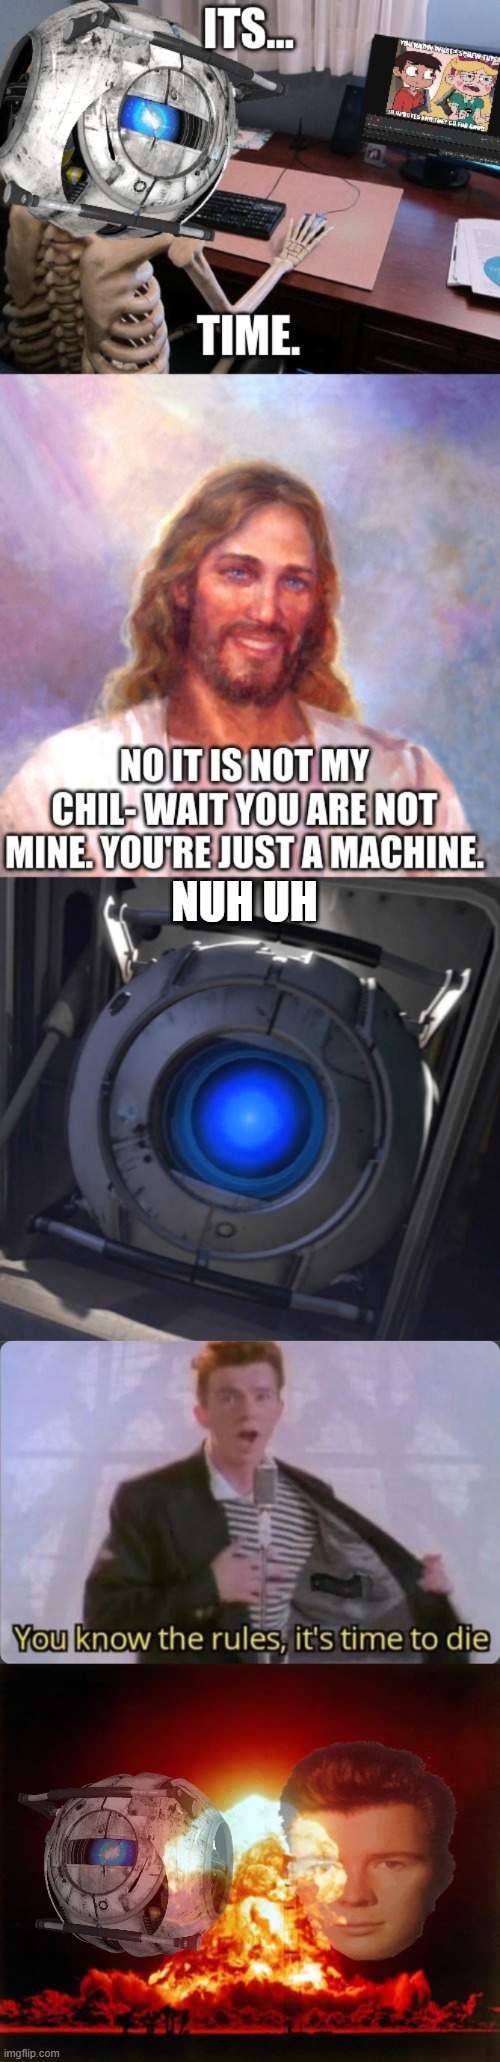 NUH UH | image tagged in wheatley,you know the rules it's time to die,memes,nuclear explosion | made w/ Imgflip meme maker